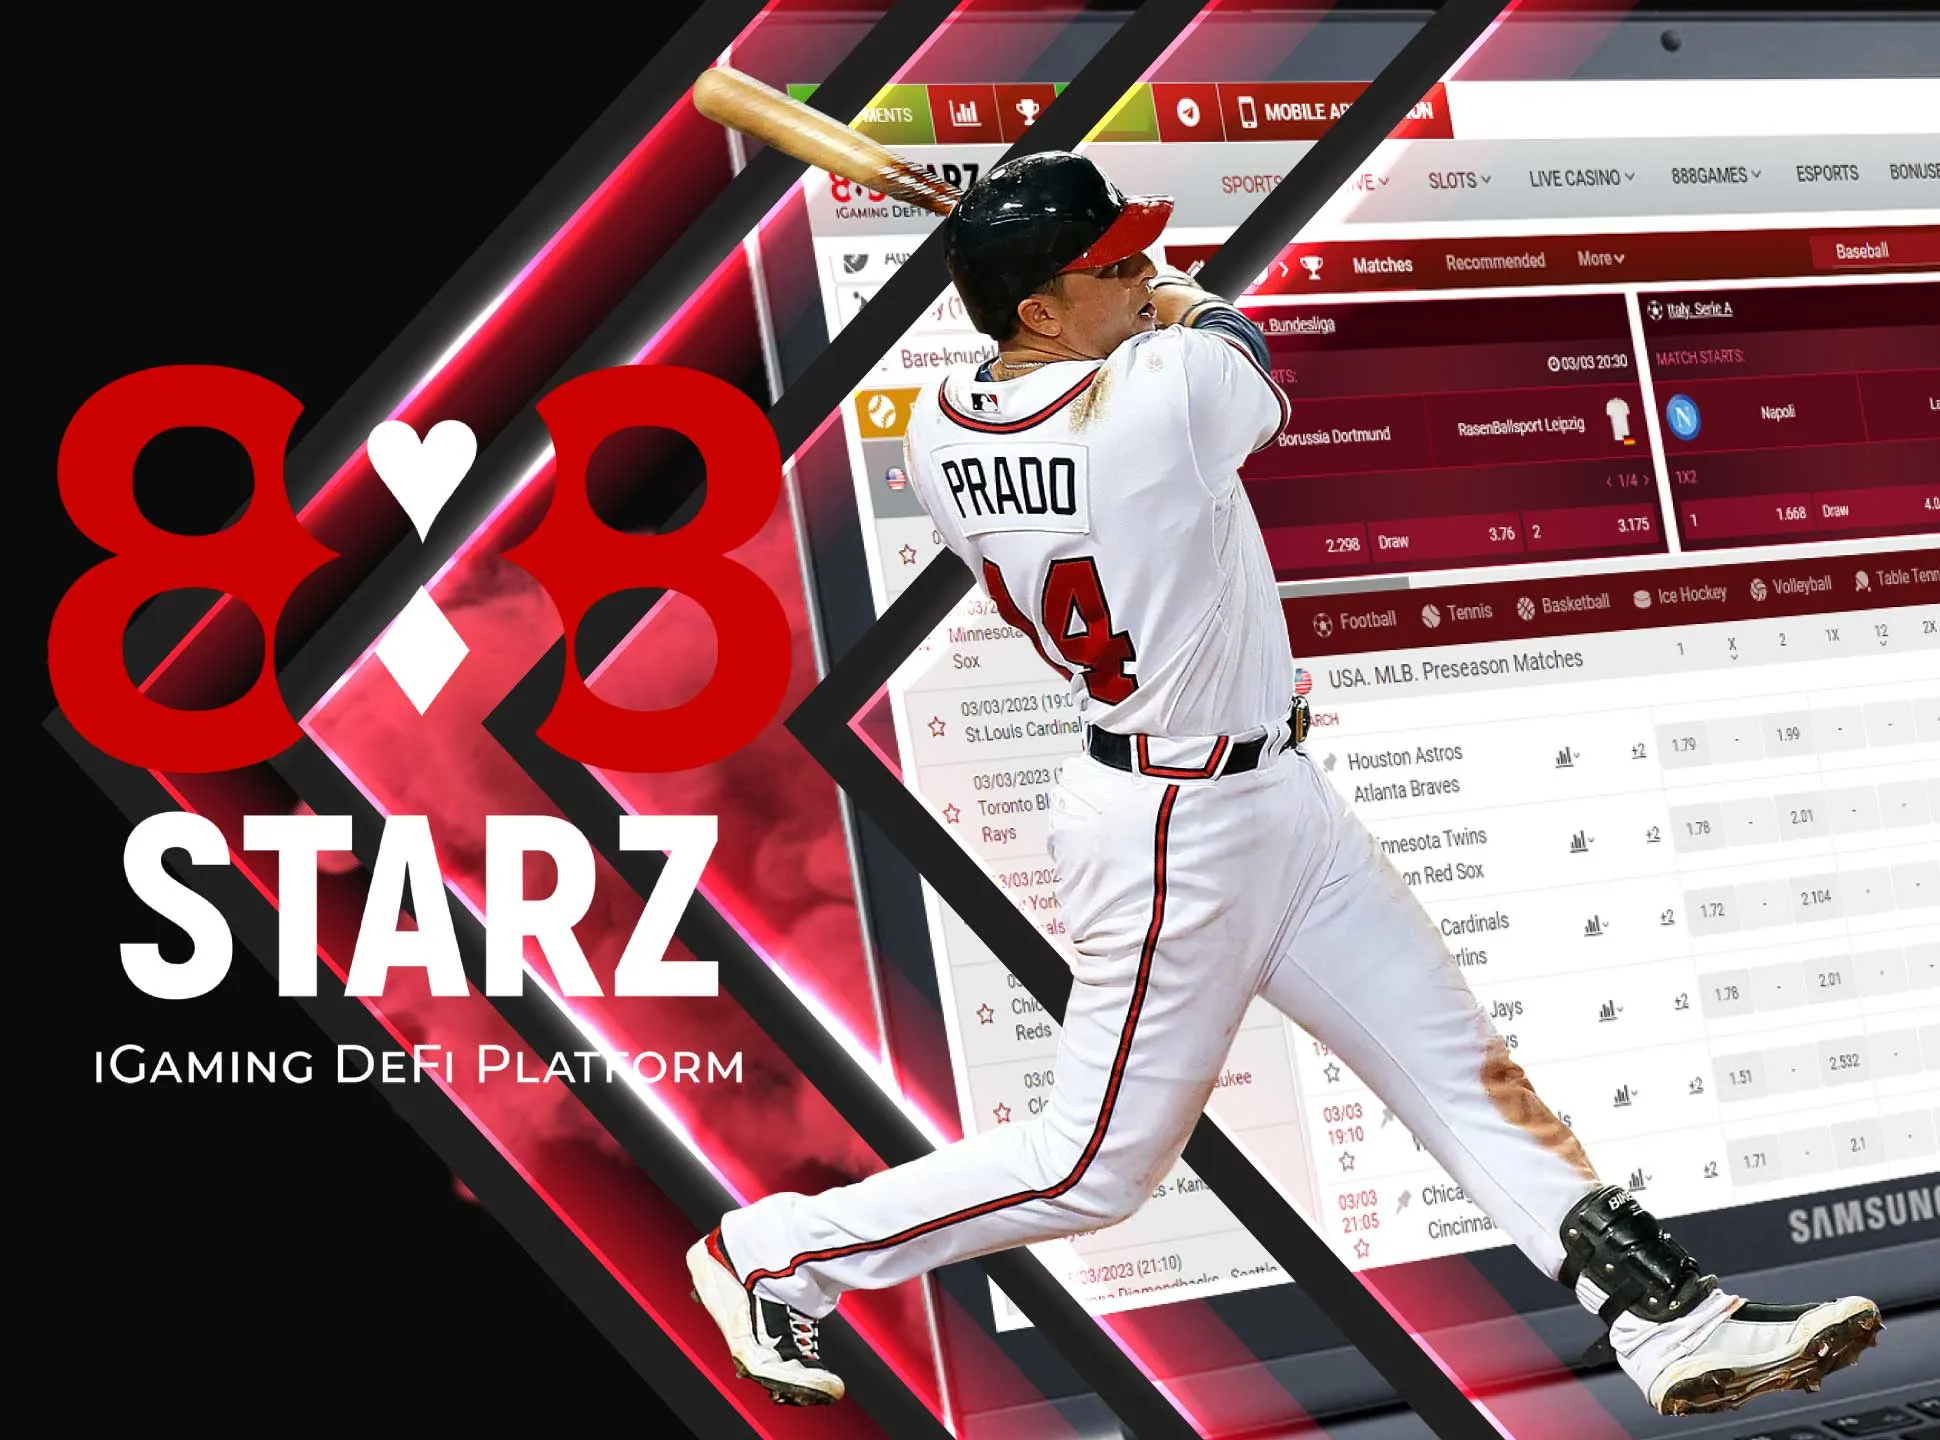 Baseball competitions are pesented in the 888starz sportsook.